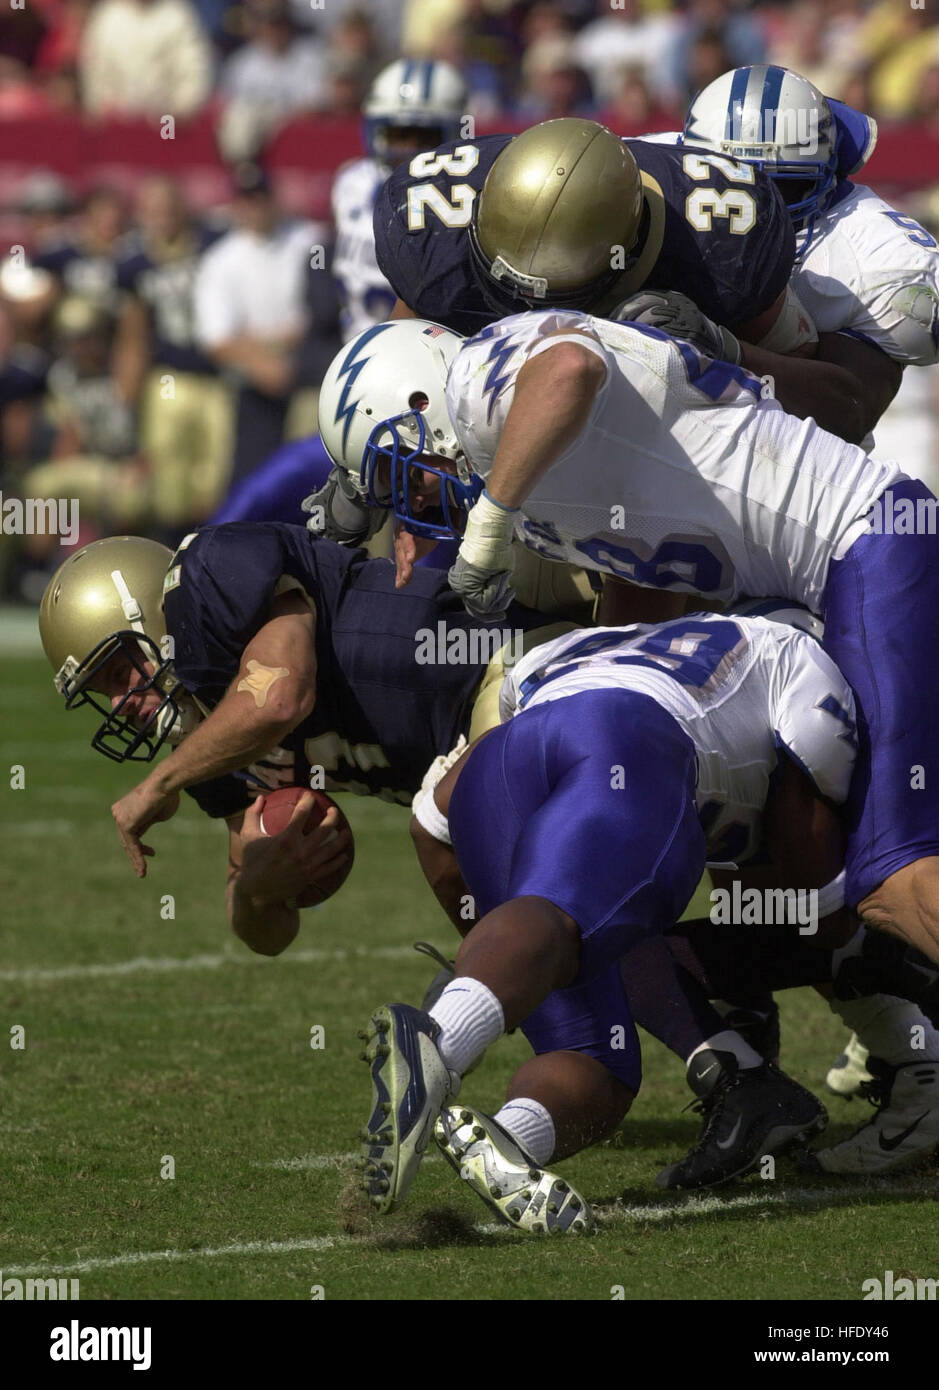 031004-N-6157F-013 Landover, Md. (Oct. 4, 2003) Navy senior quarterback Craig Candeto is tackled by Air Force free safety Larry Duncan and linebacker John Rudzinski. Navy upset Air Force 25-28 in the inter-service game at FedEx field in Landover, Md. The Midshipmen snapped a six-game losing streak to the Falcons with the victory. The victory put Navy in excellent position to win the Commander-In-Chief's Trophy, awarded to the team with the best record in games between the three major service academies. The trophy will be up for grabs when Navy plays Army Dec. 6. U.S. Navy photo by Journalist 1 Stock Photo